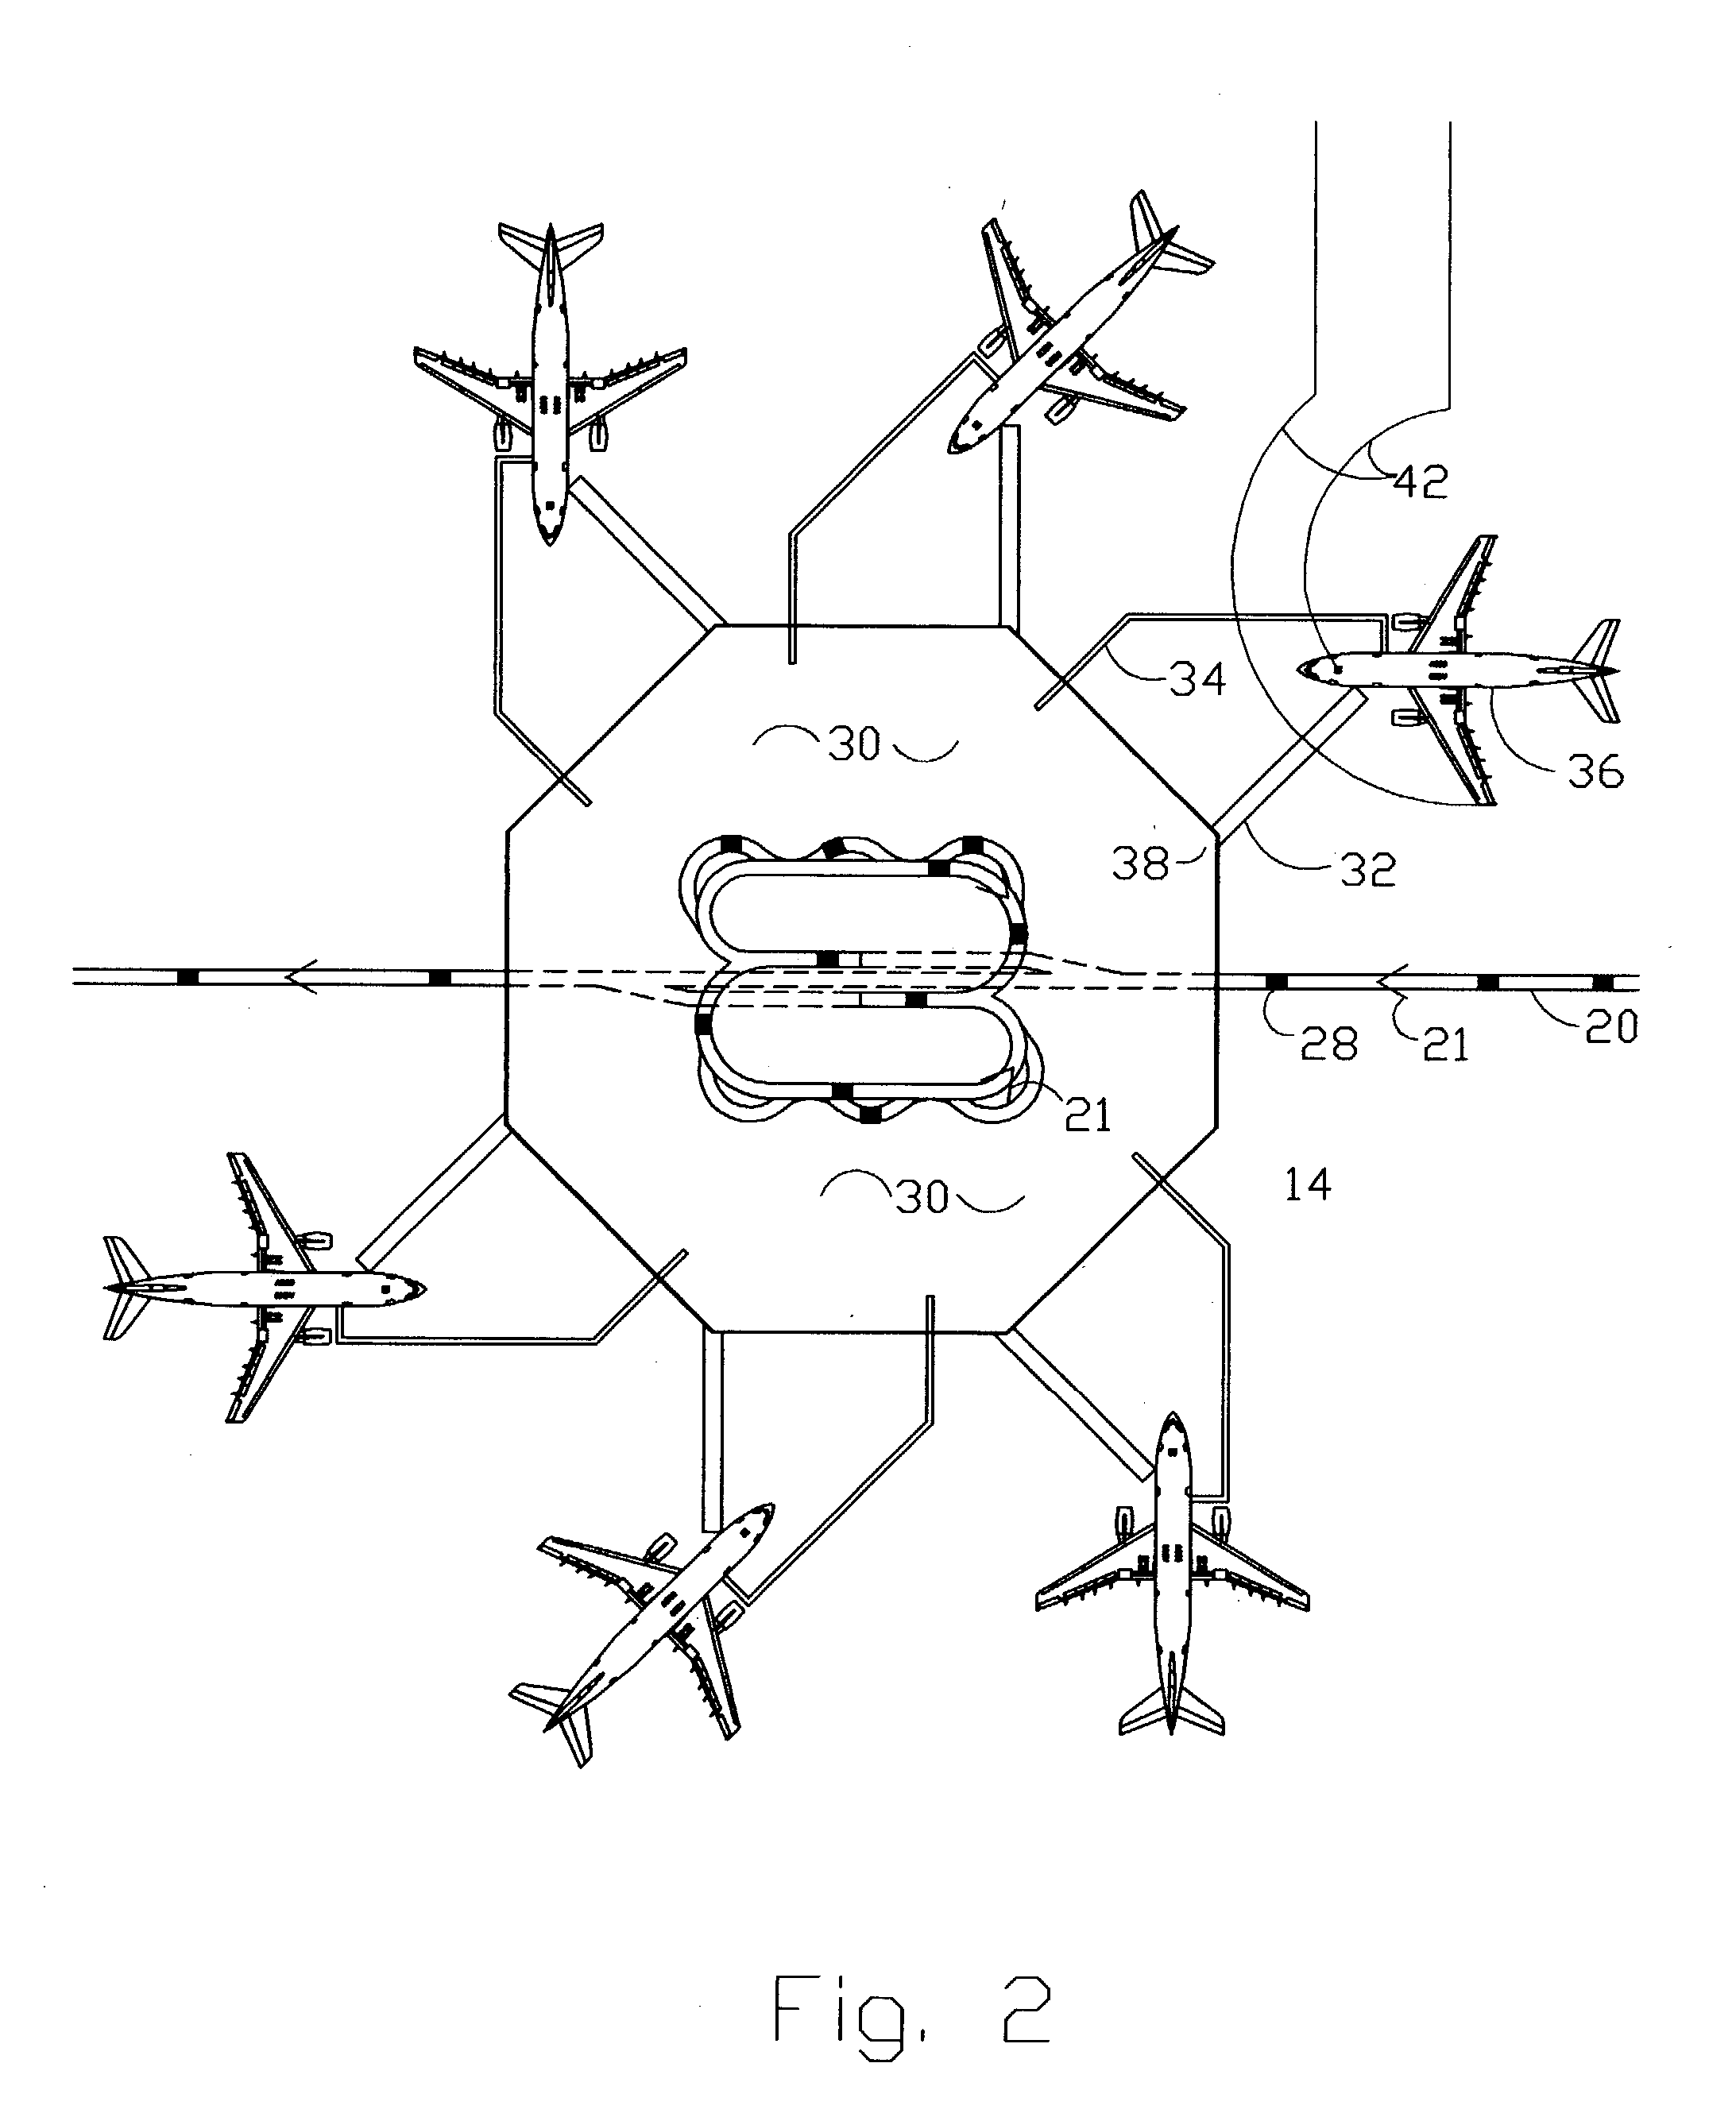 Airport passenger processing and surface transportation system